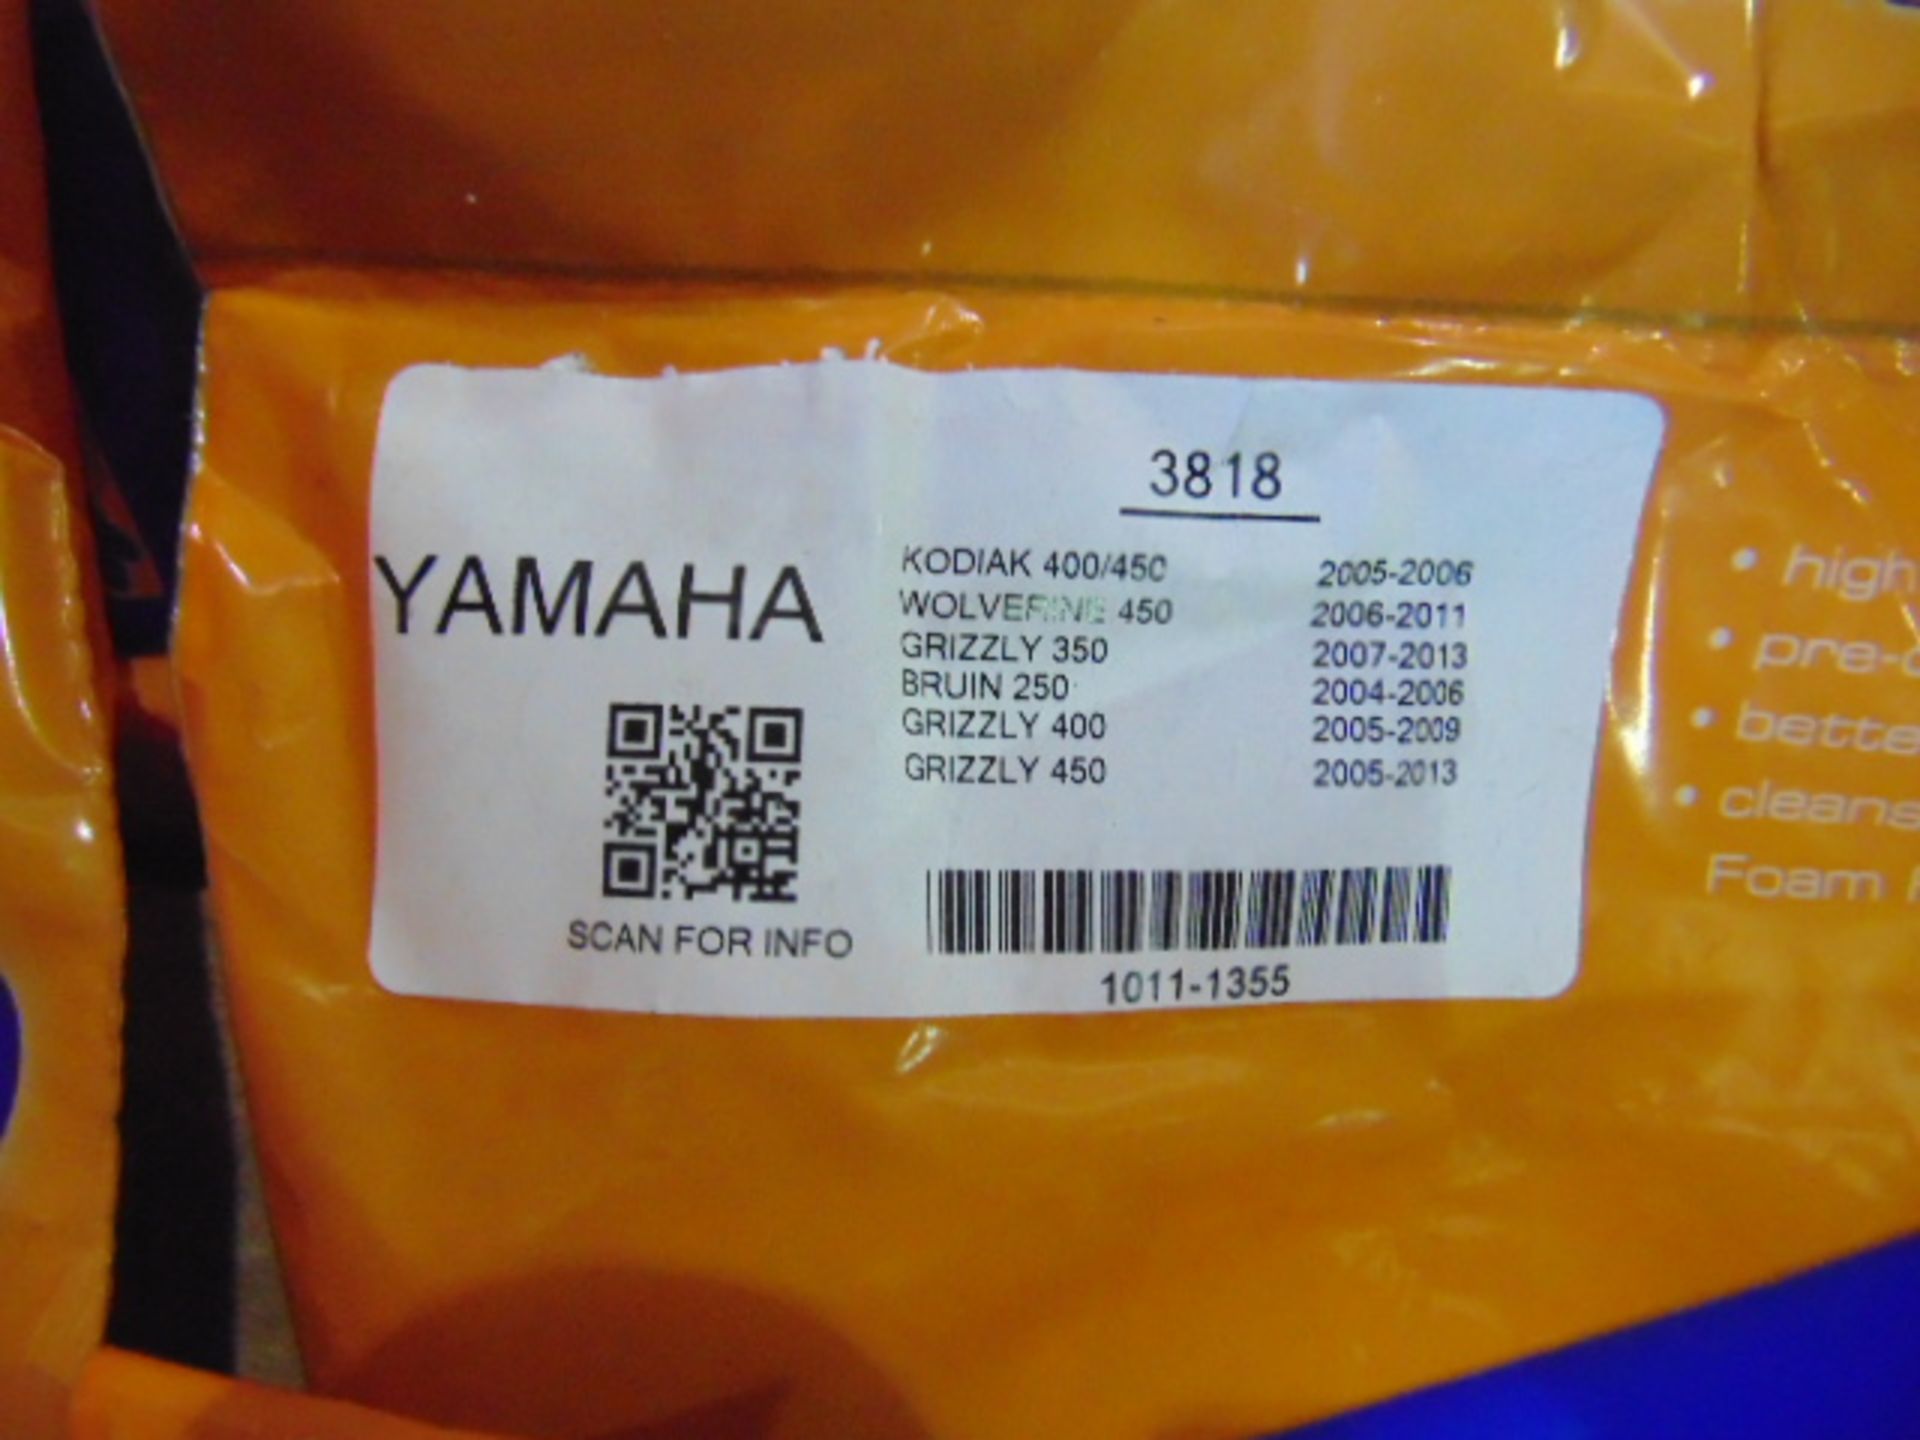 Yamaha Grizzly Maintenance Spares consisting of Spark Plugs, Filters, Belts, Lamps, Fuses Brake Pads - Bild 10 aus 10